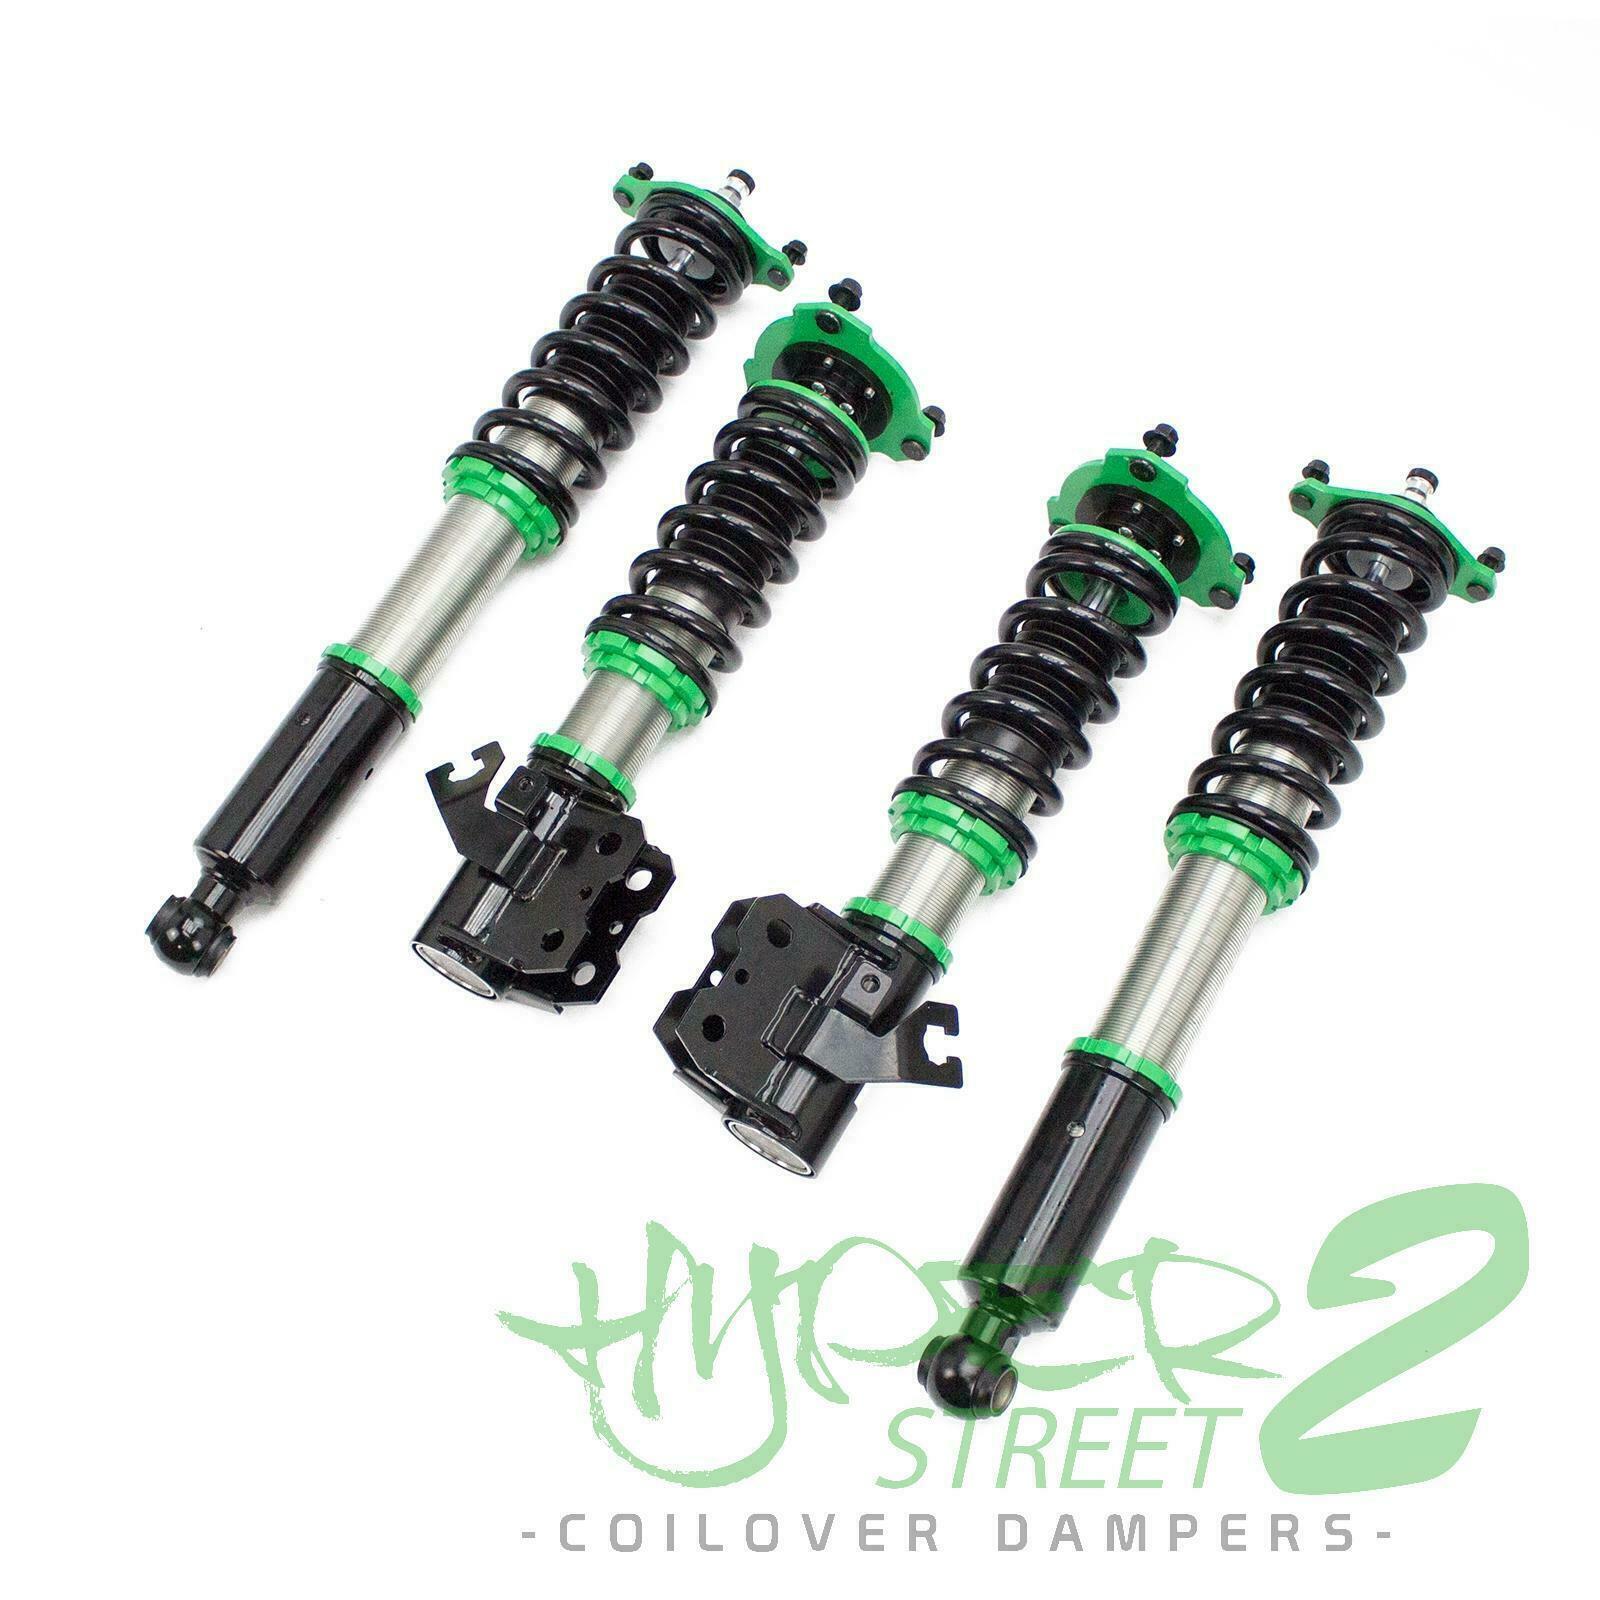 Rev9 Power Hyper Street Coilovers Lowering Suspension Silvia 240sx S14 95-98 New